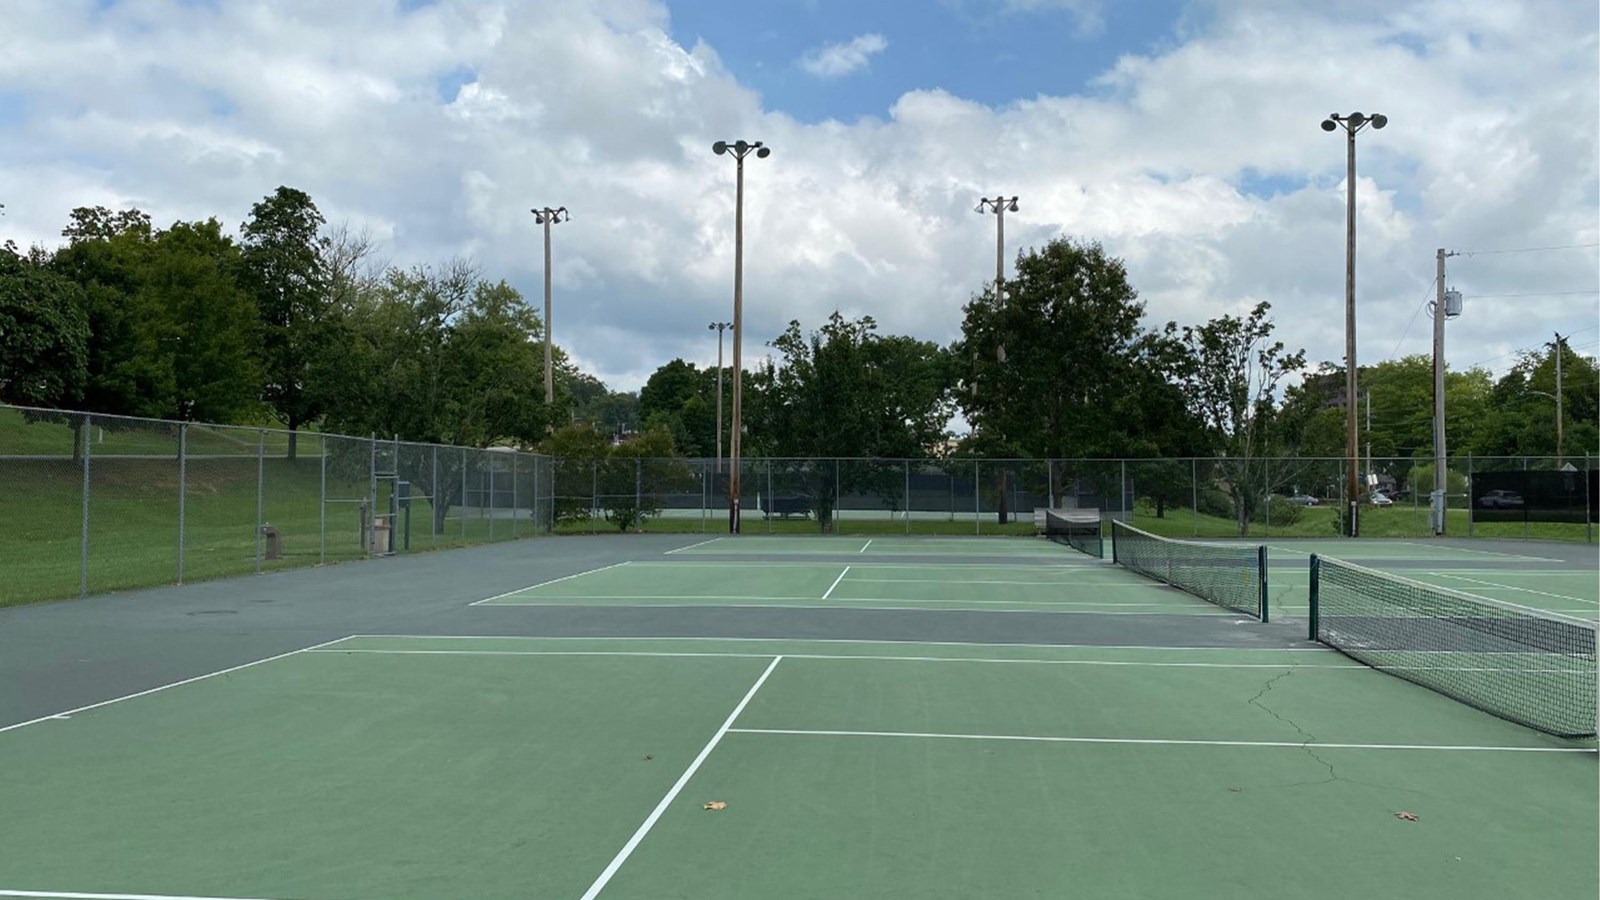 Three green courts with white stripes and three nets all surrounded by chain-link fencing.